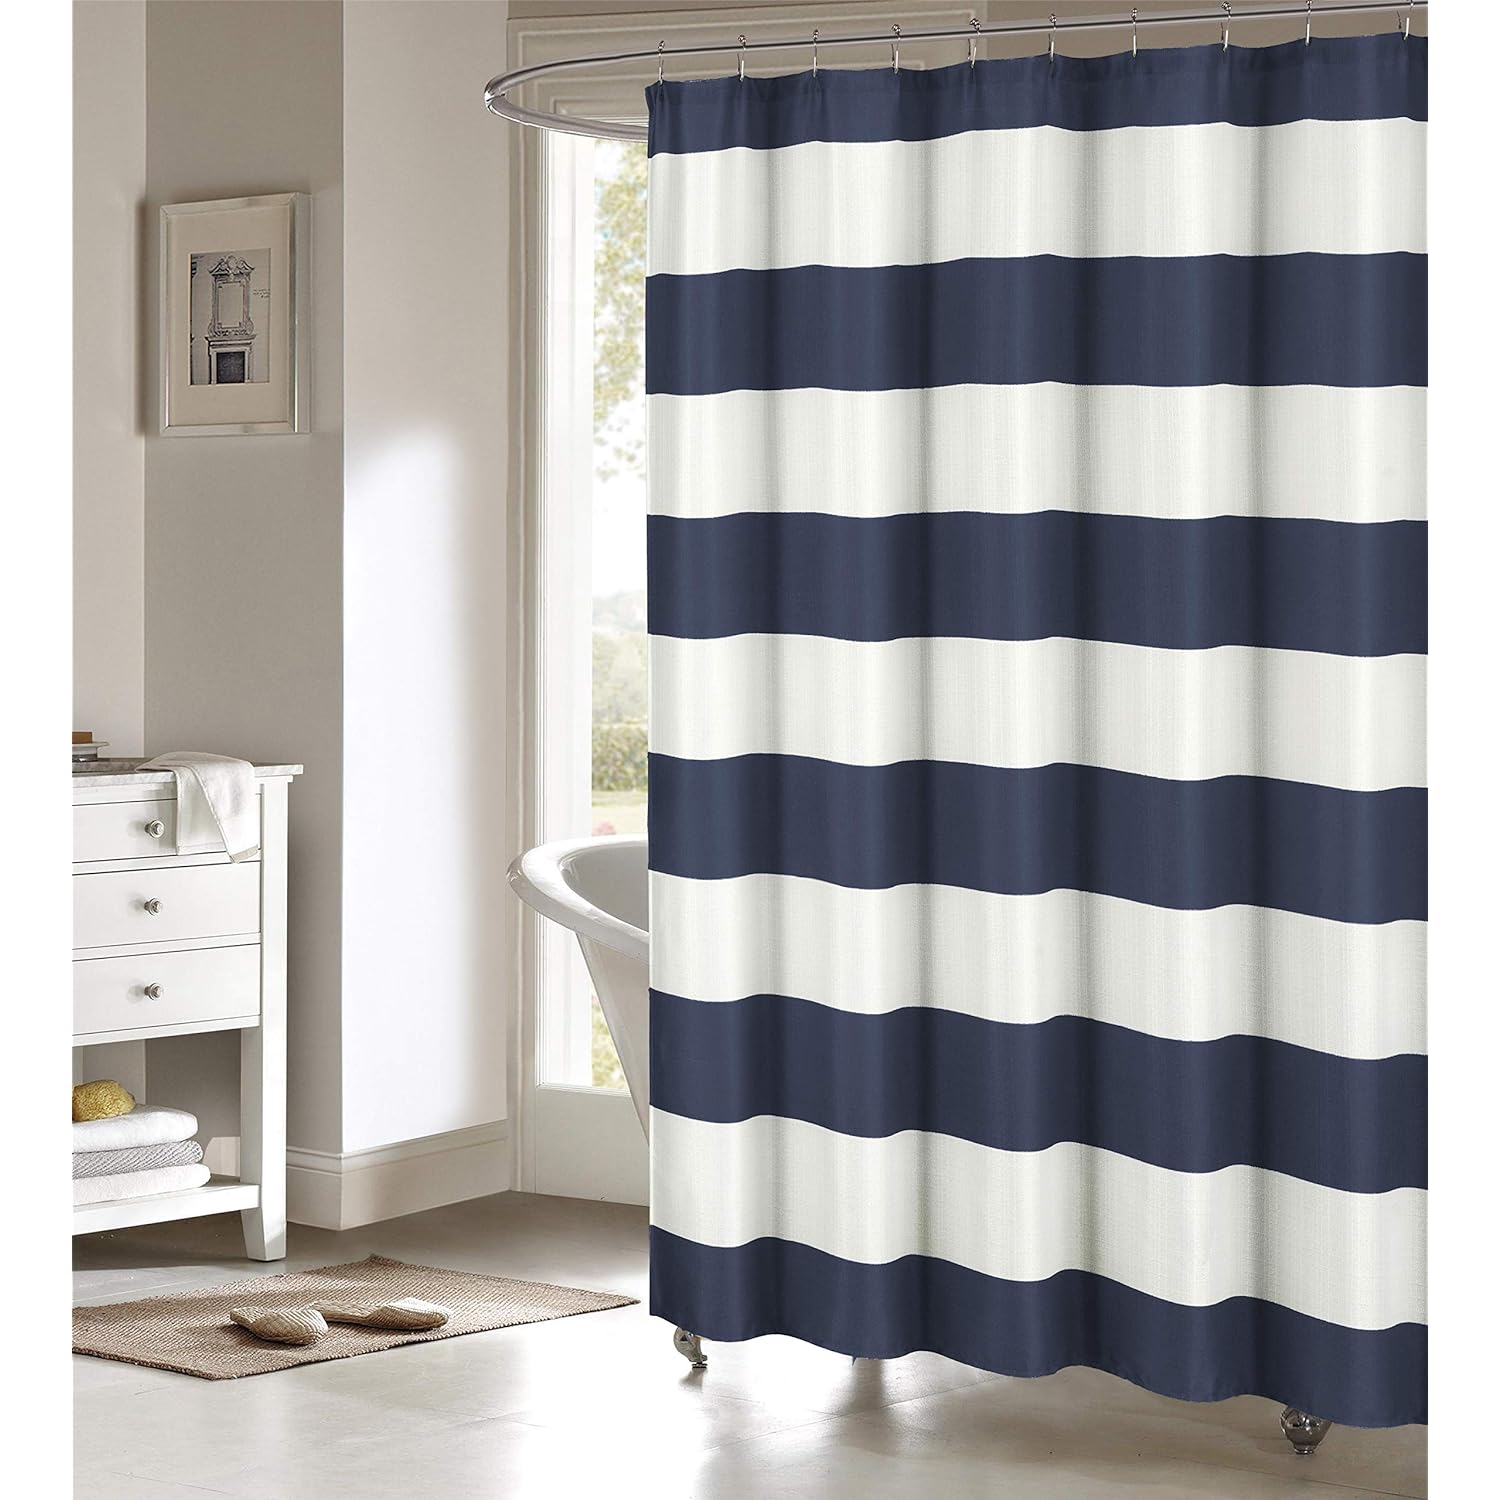 GCP Products Toto Cabana Stripe Shower Curtain, 70X70, Navy